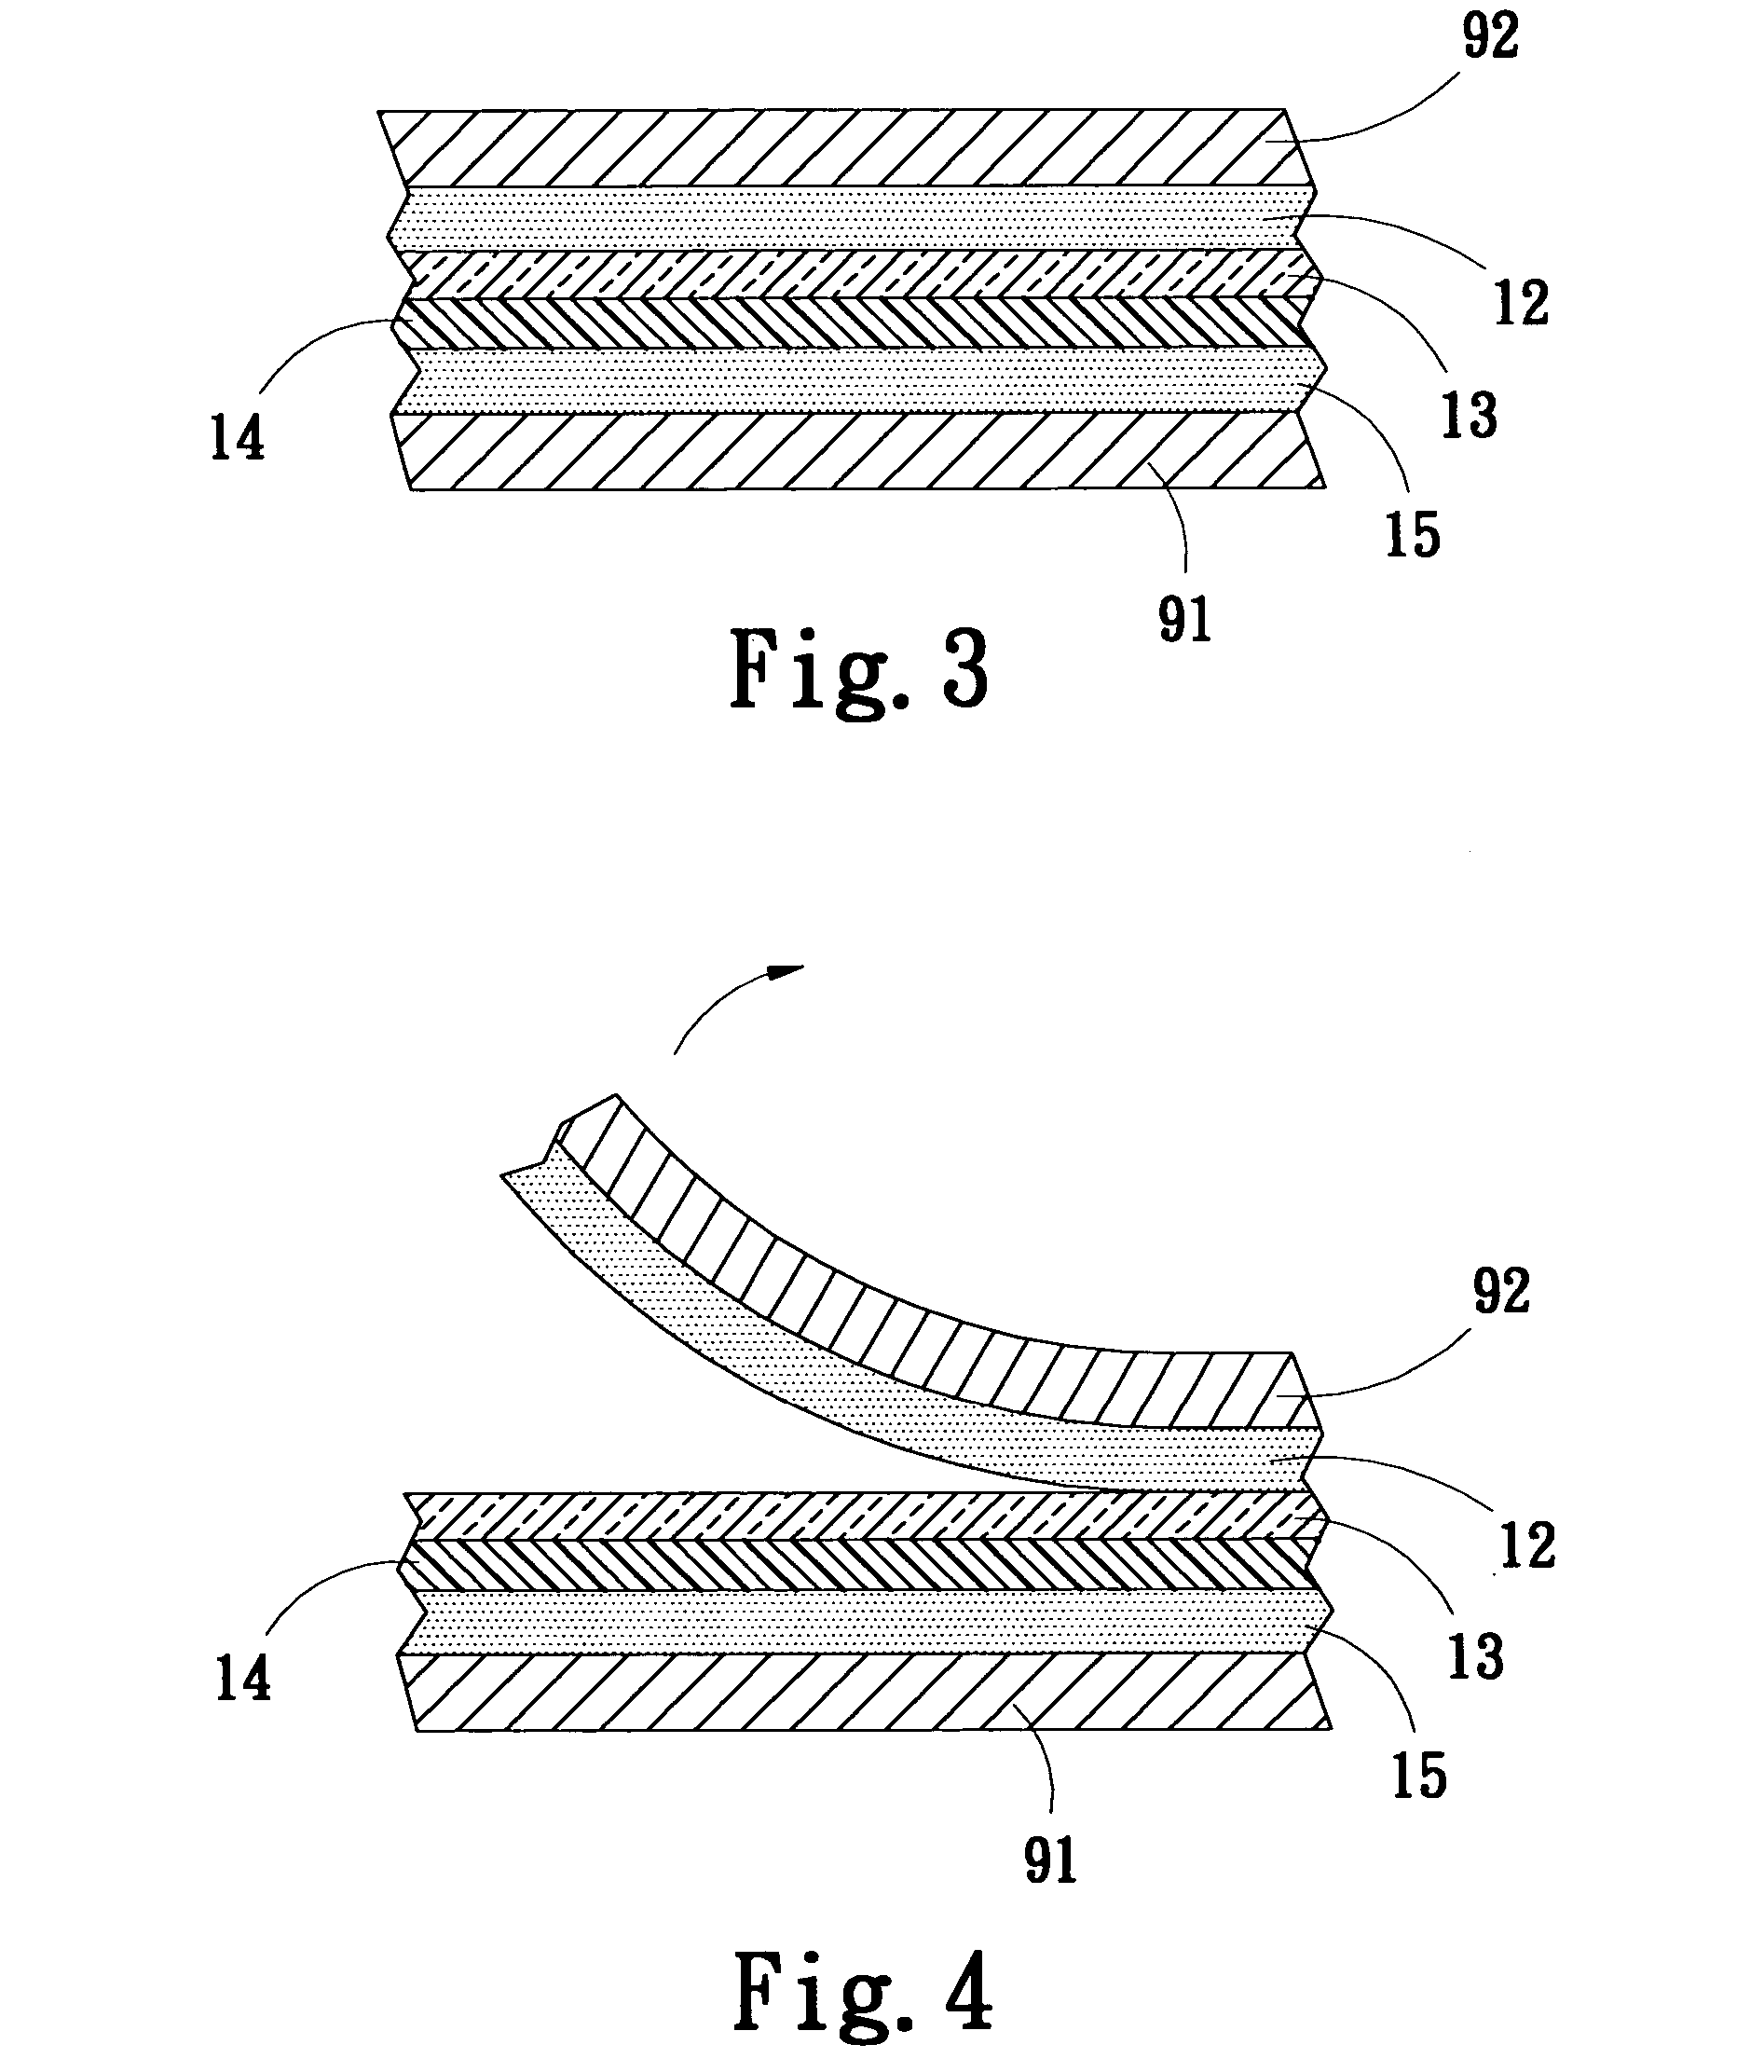 Adhesive tape structure for sealing and keeping secrecy